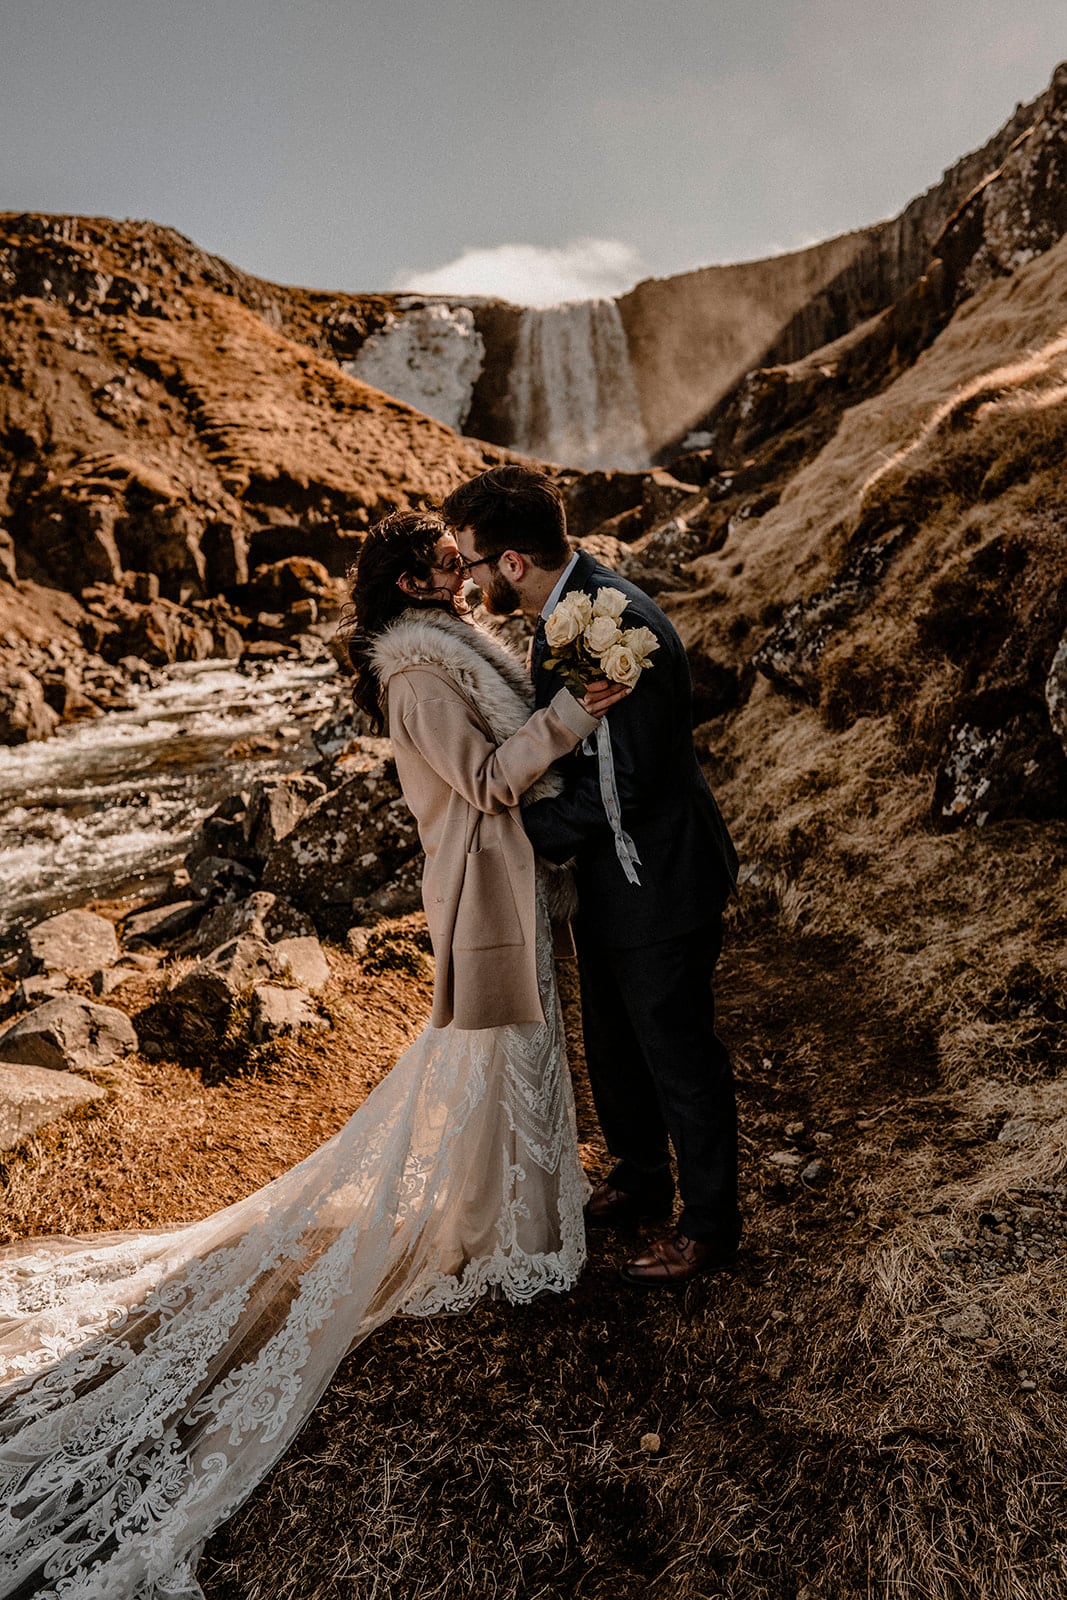 Nature's Embrace: Bride and Groom Captured in Western Iceland's Charm